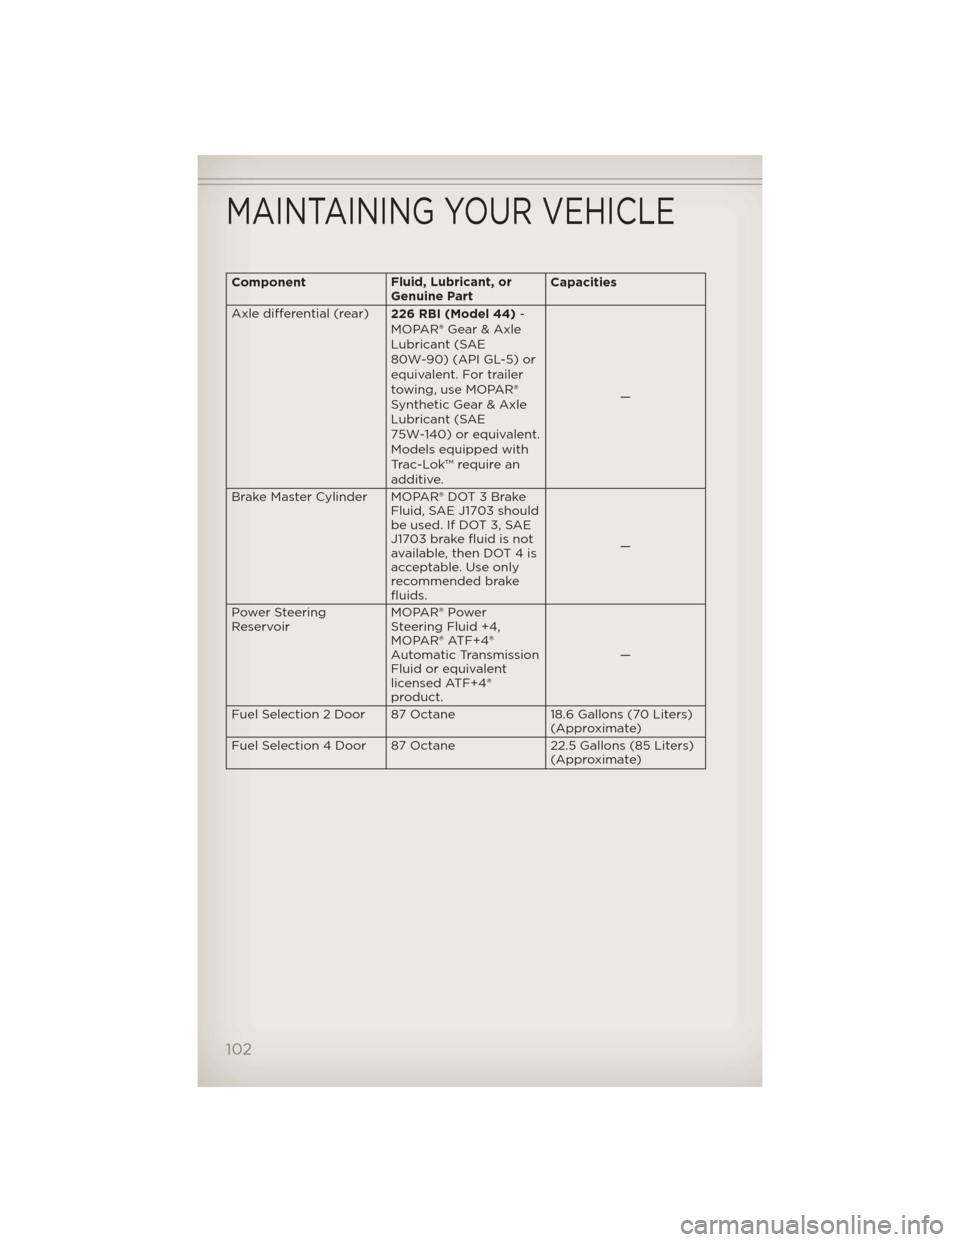 JEEP WRANGLER 2012 JK / 3.G User Guide ComponentFluid, Lubricant, or
Genuine PartCapacities
Axle differential (rear)
226 RBI (Model 44)-
MOPAR® Gear & Axle
Lubricant (SAE
80W-90) (API GL-5) or
equivalent. For trailer
towing, use MOPAR®
S